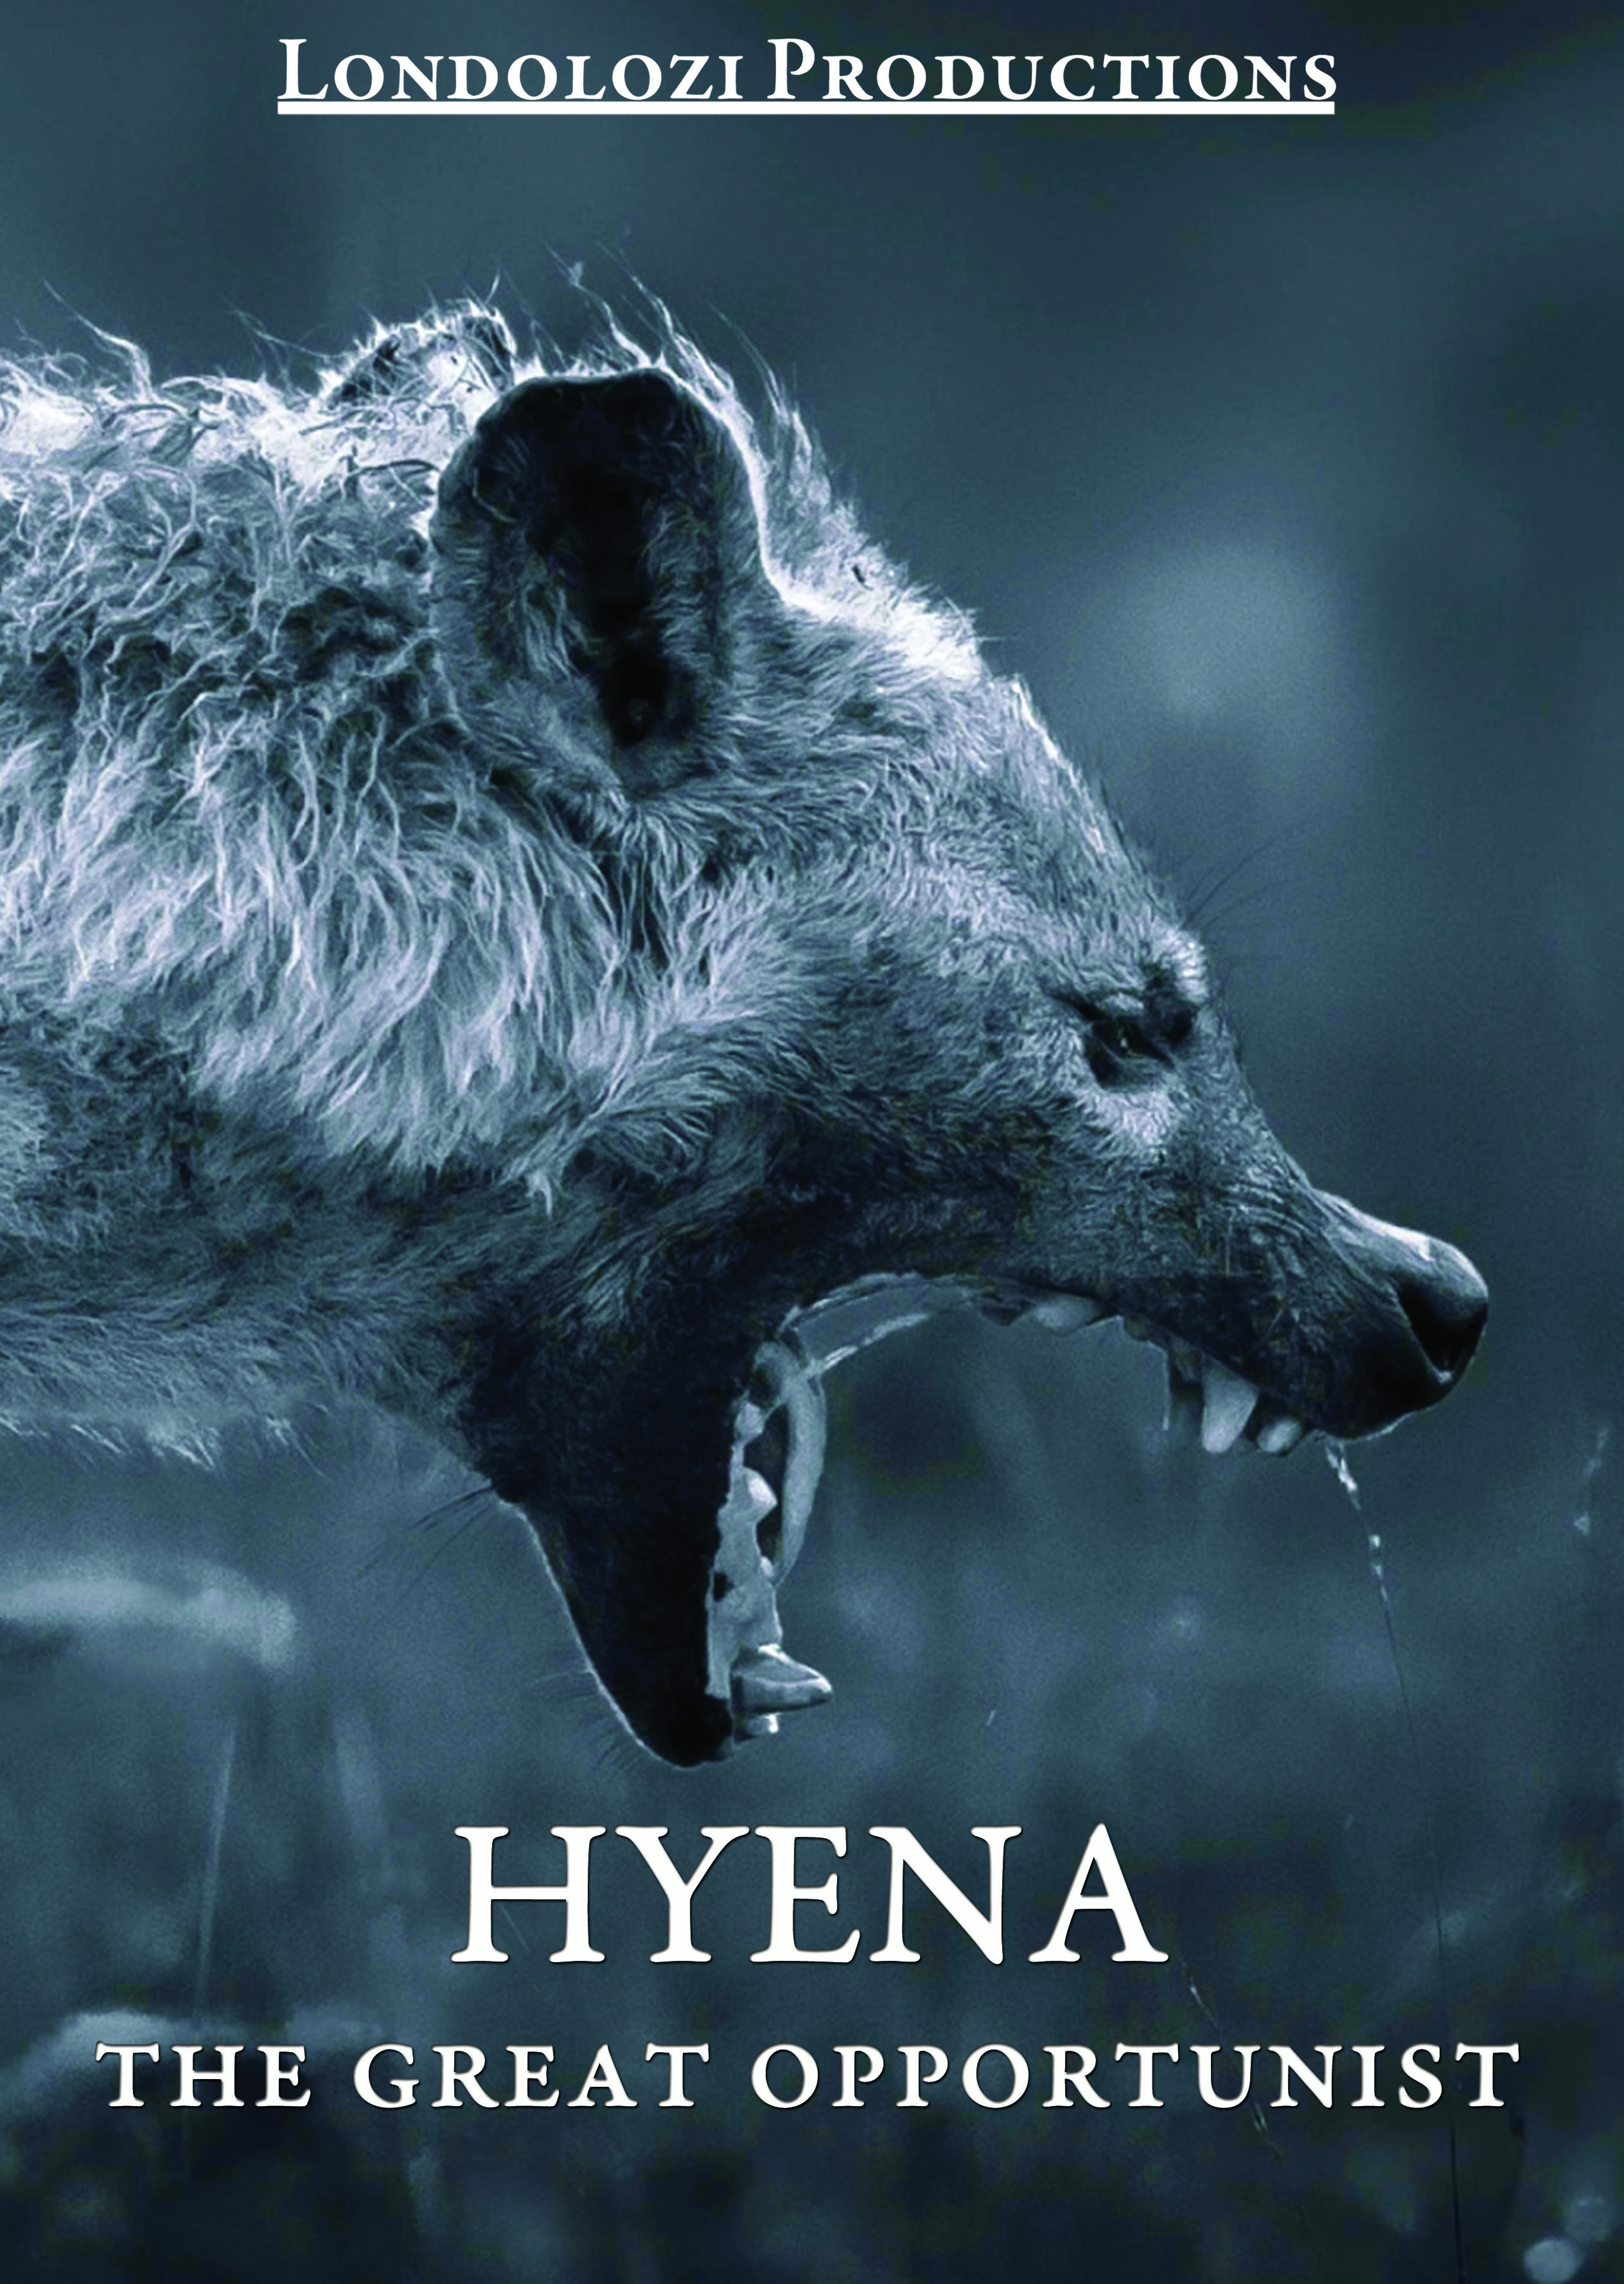 Hyena: The great opportunist